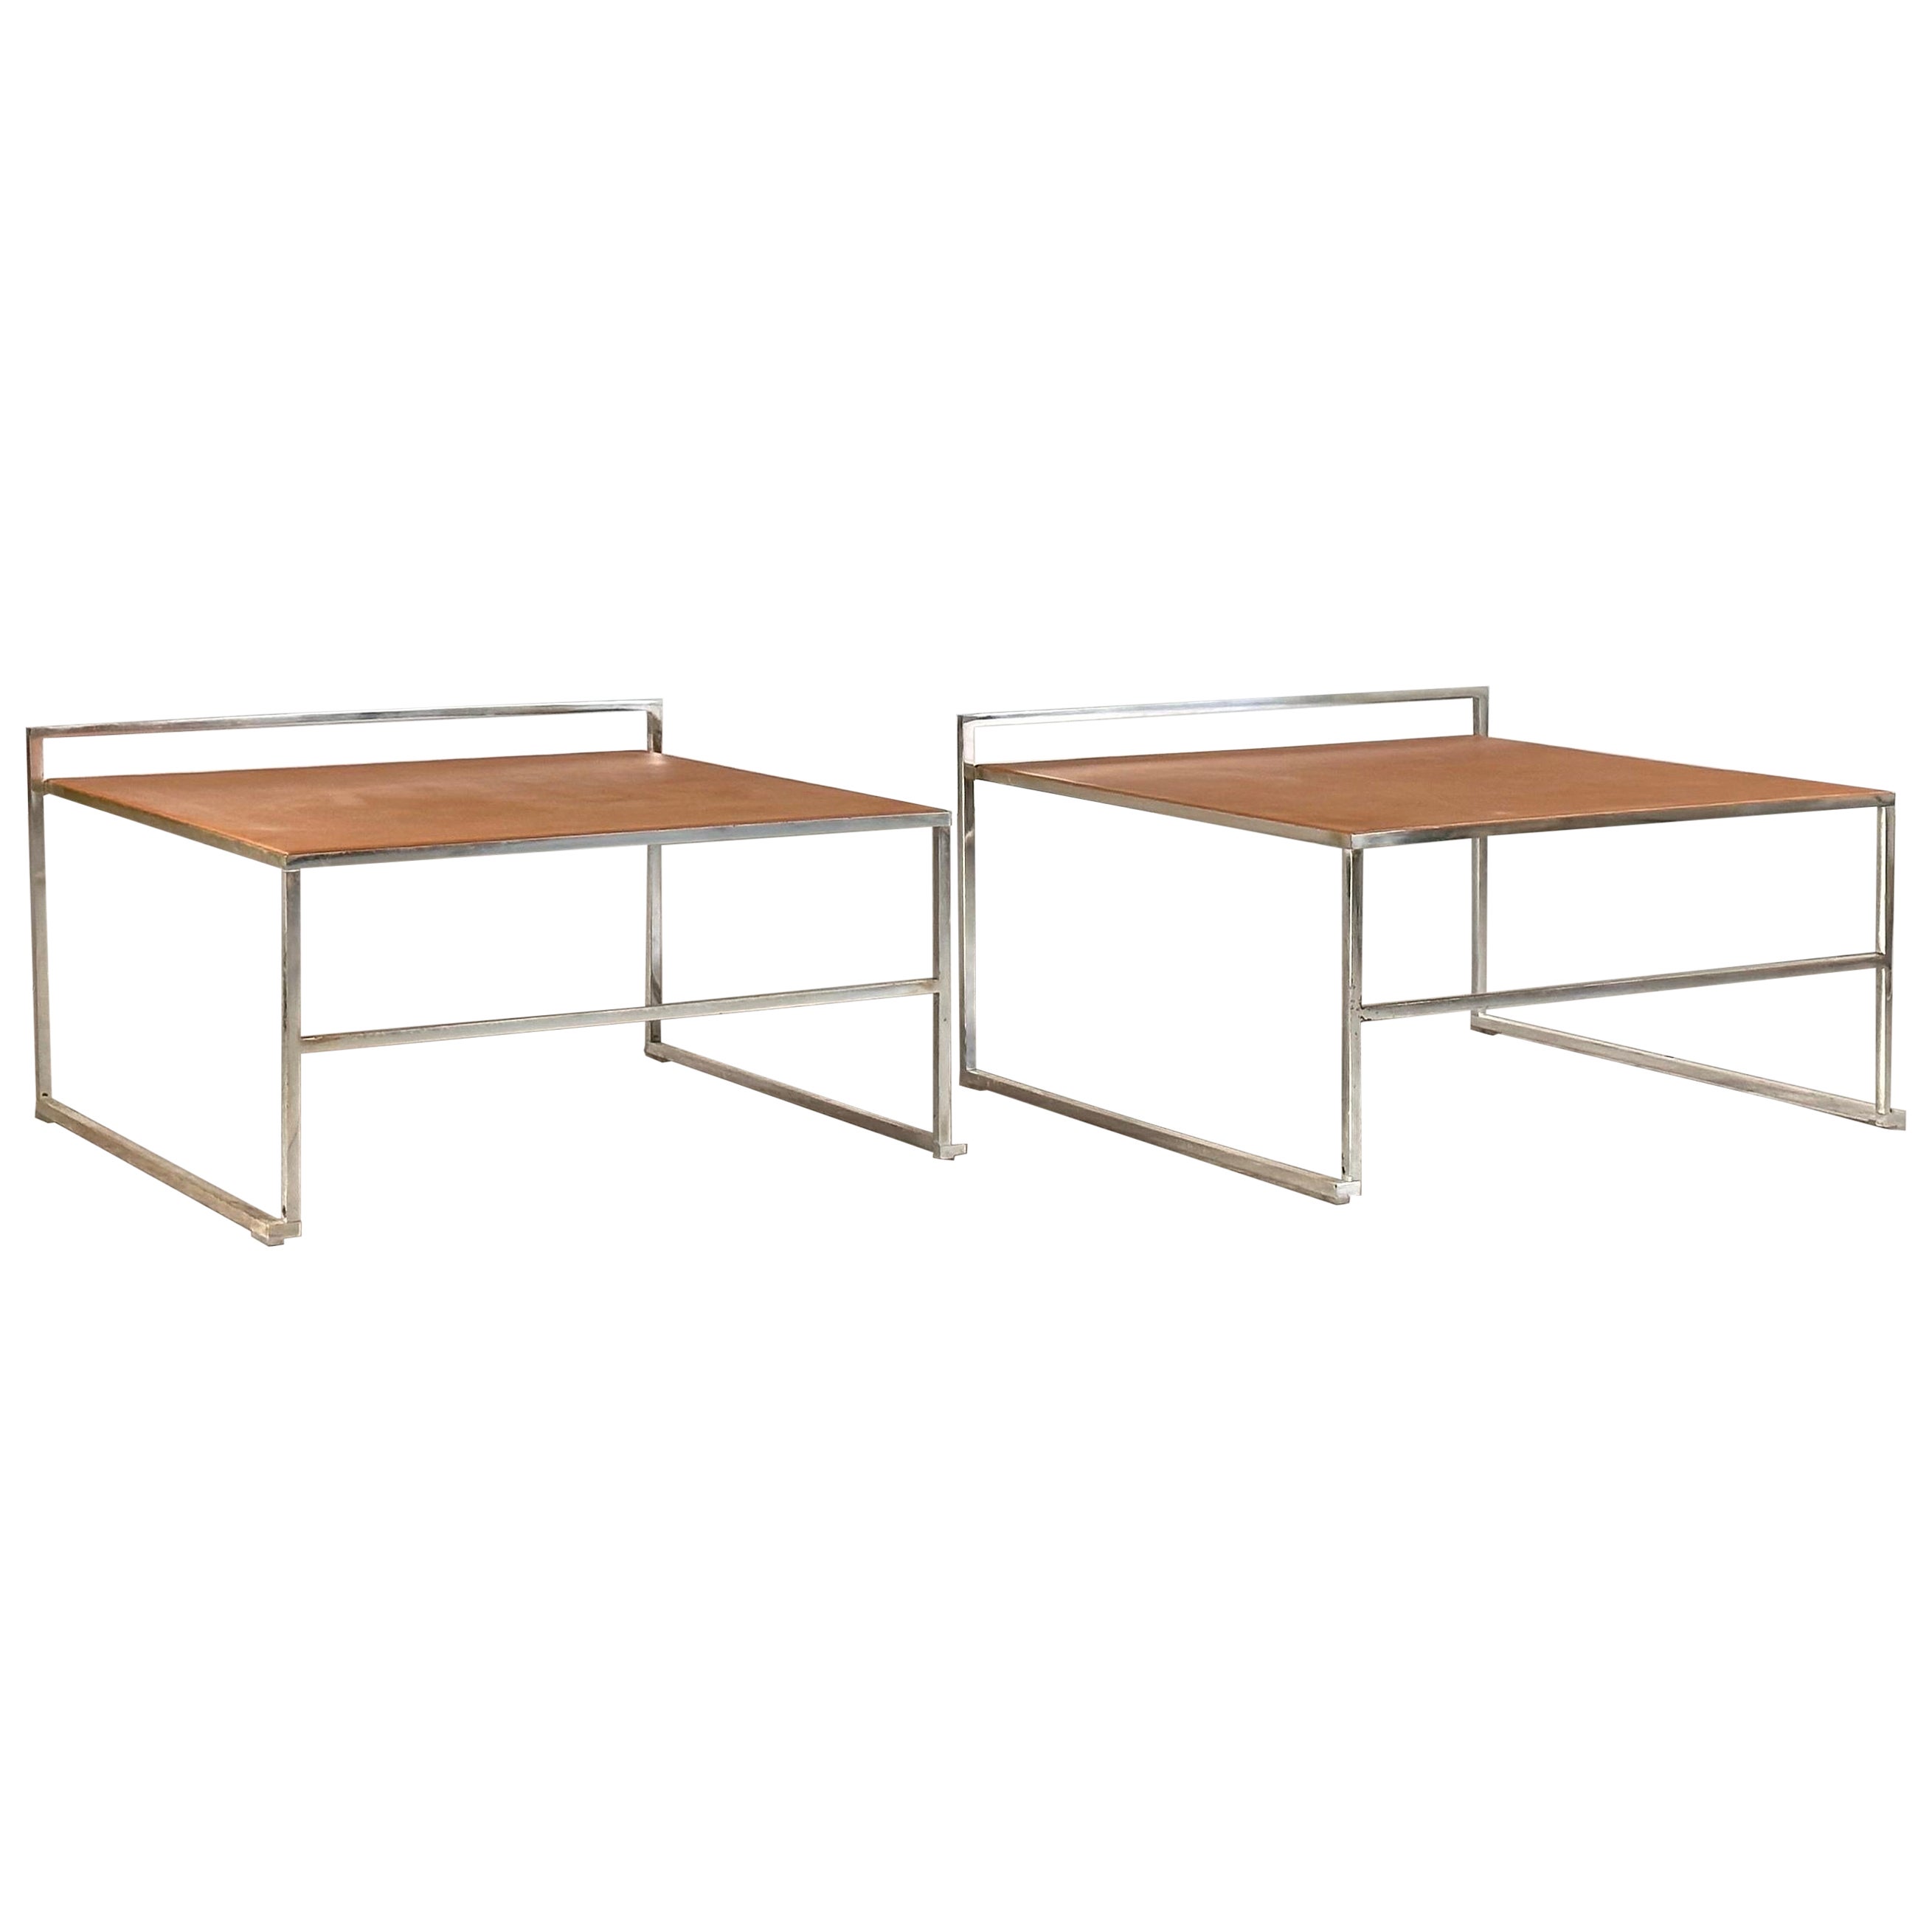 "Quadra" Bedside/Small Nesting Tables in Cognac Leather by Poltrona Frau, 1970s